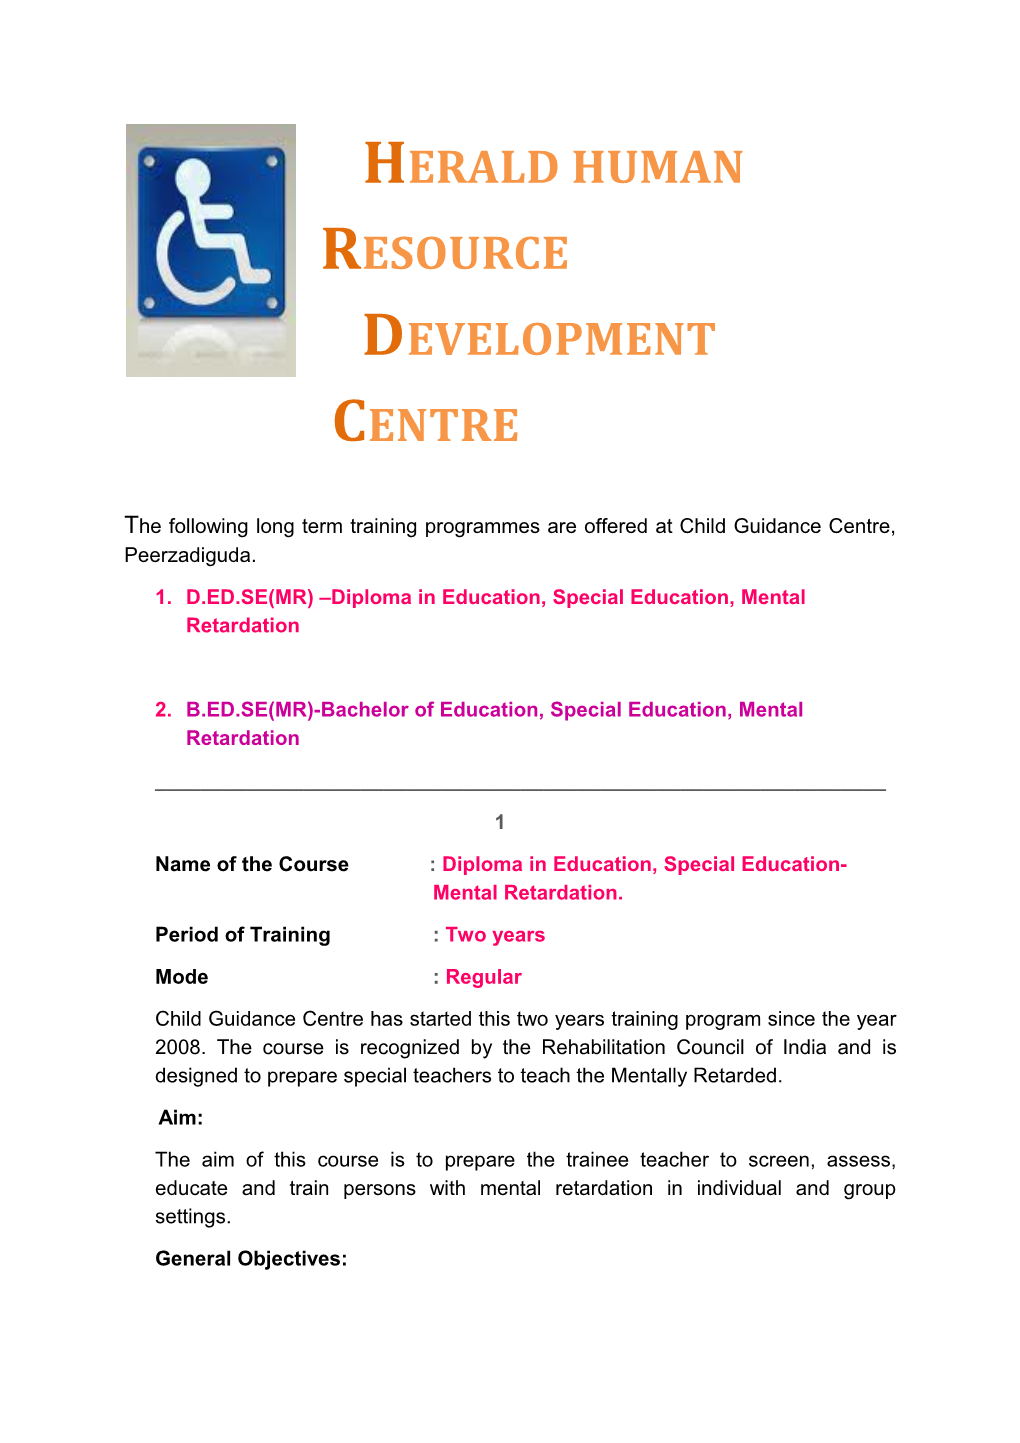 Name of the Course : Diploma in Education, Special Education-Mental Retardation